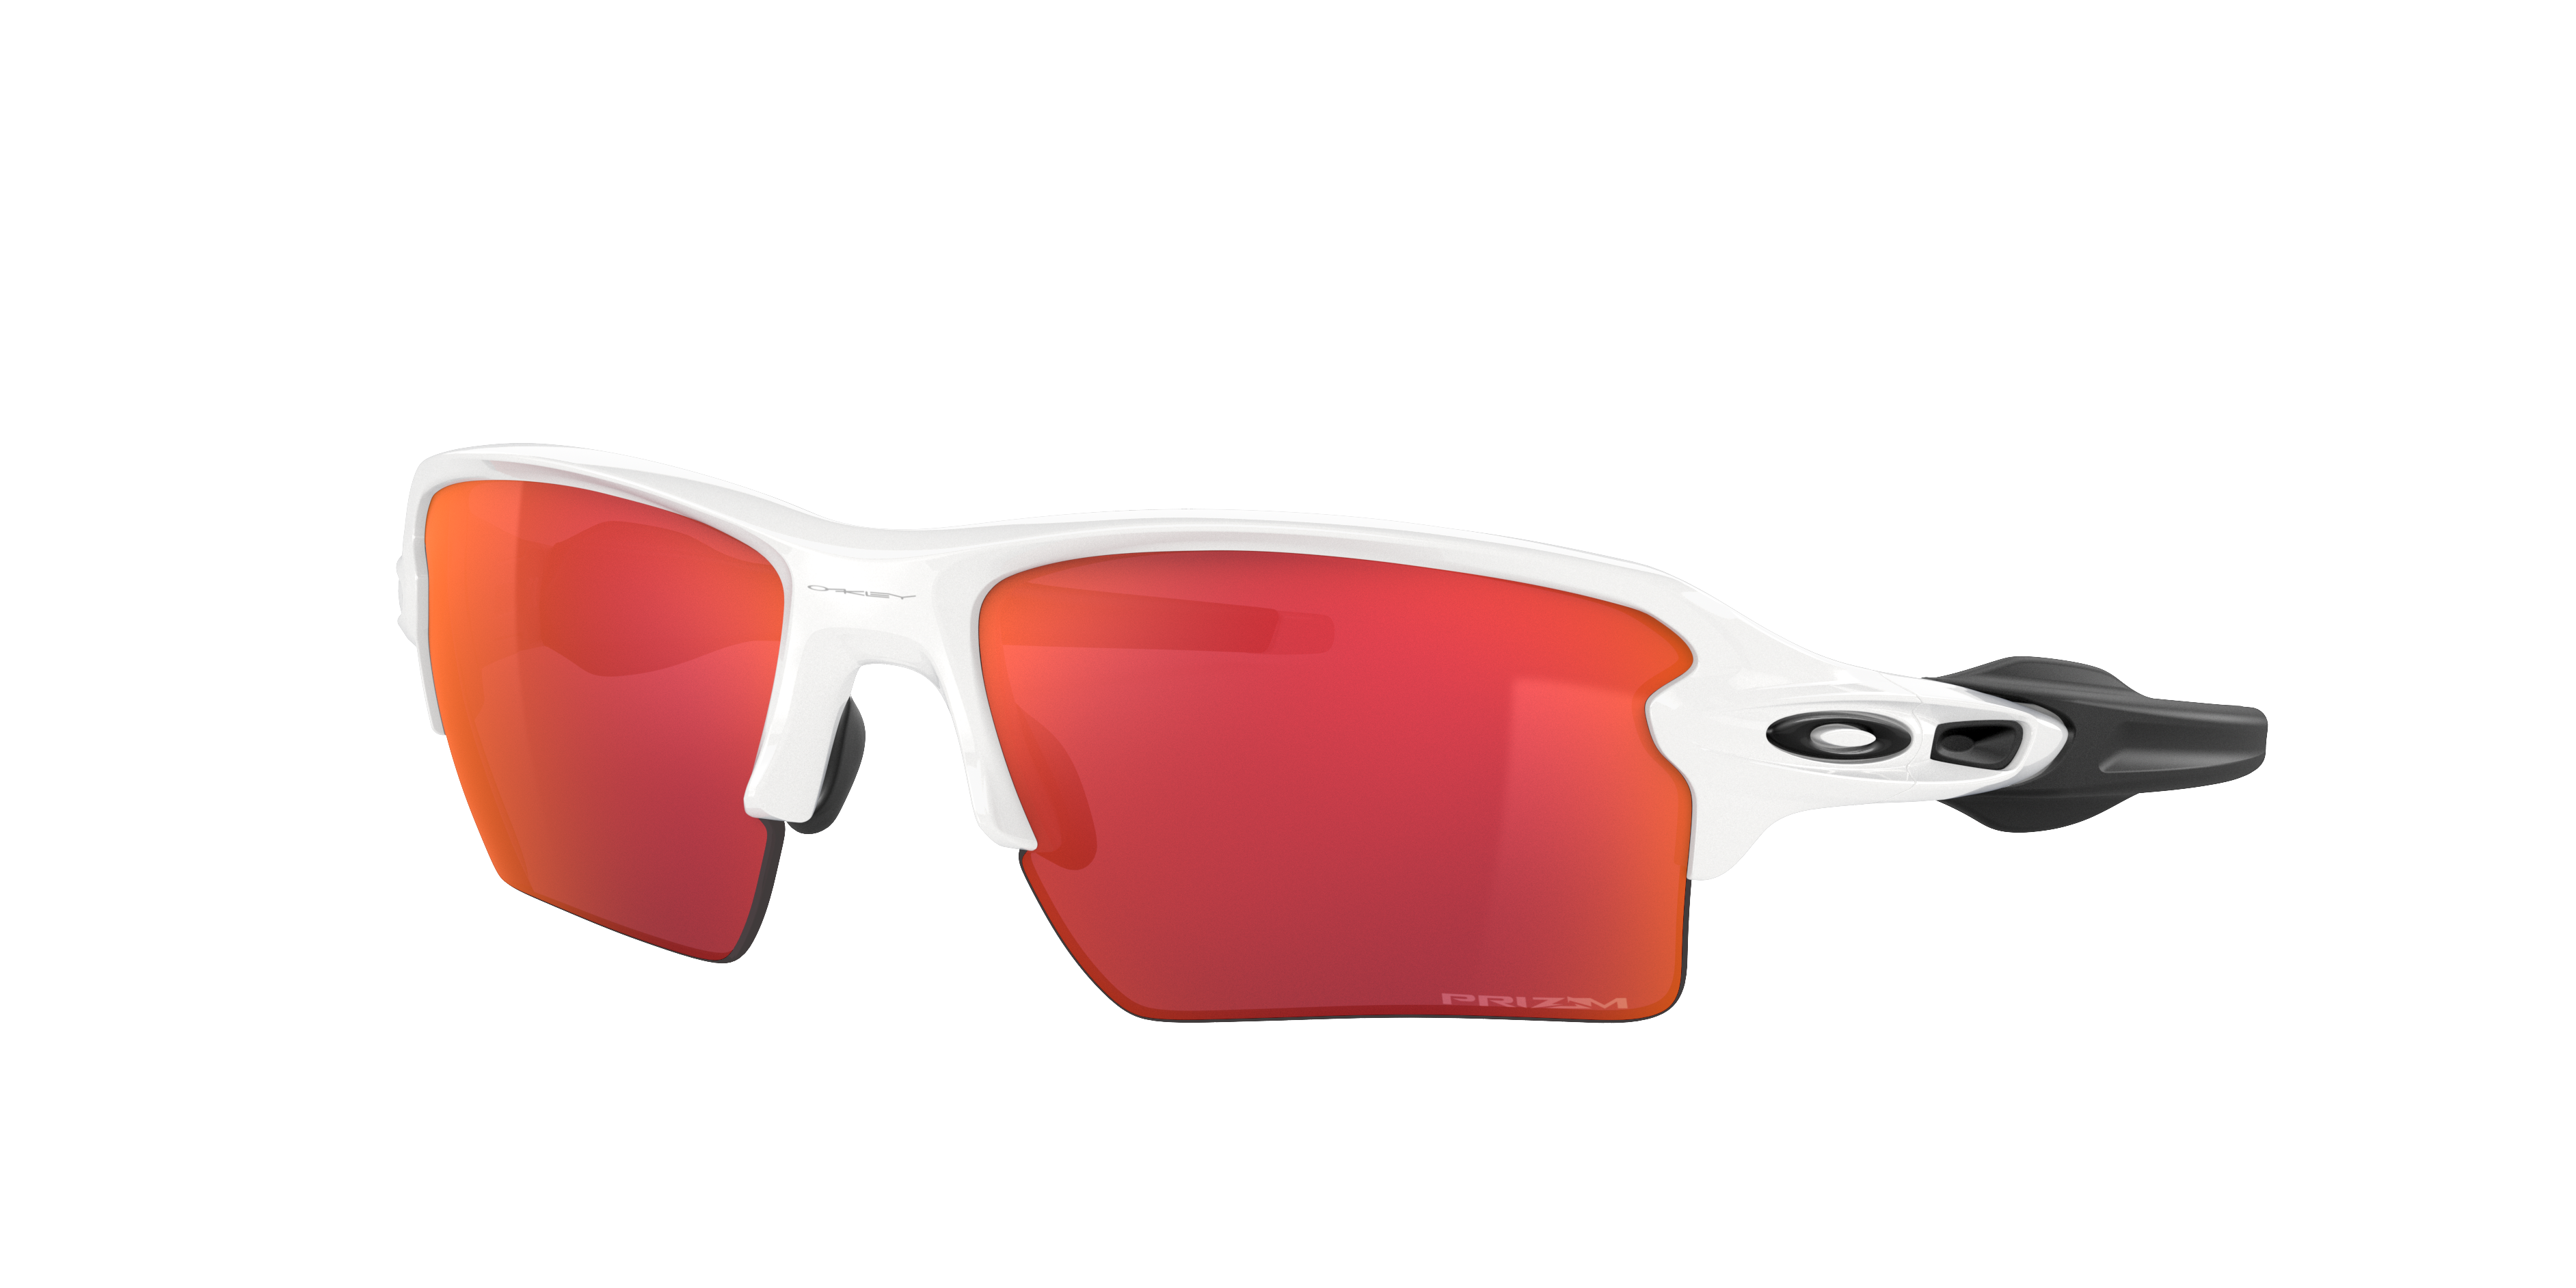 oakley red white and blue sunglasses